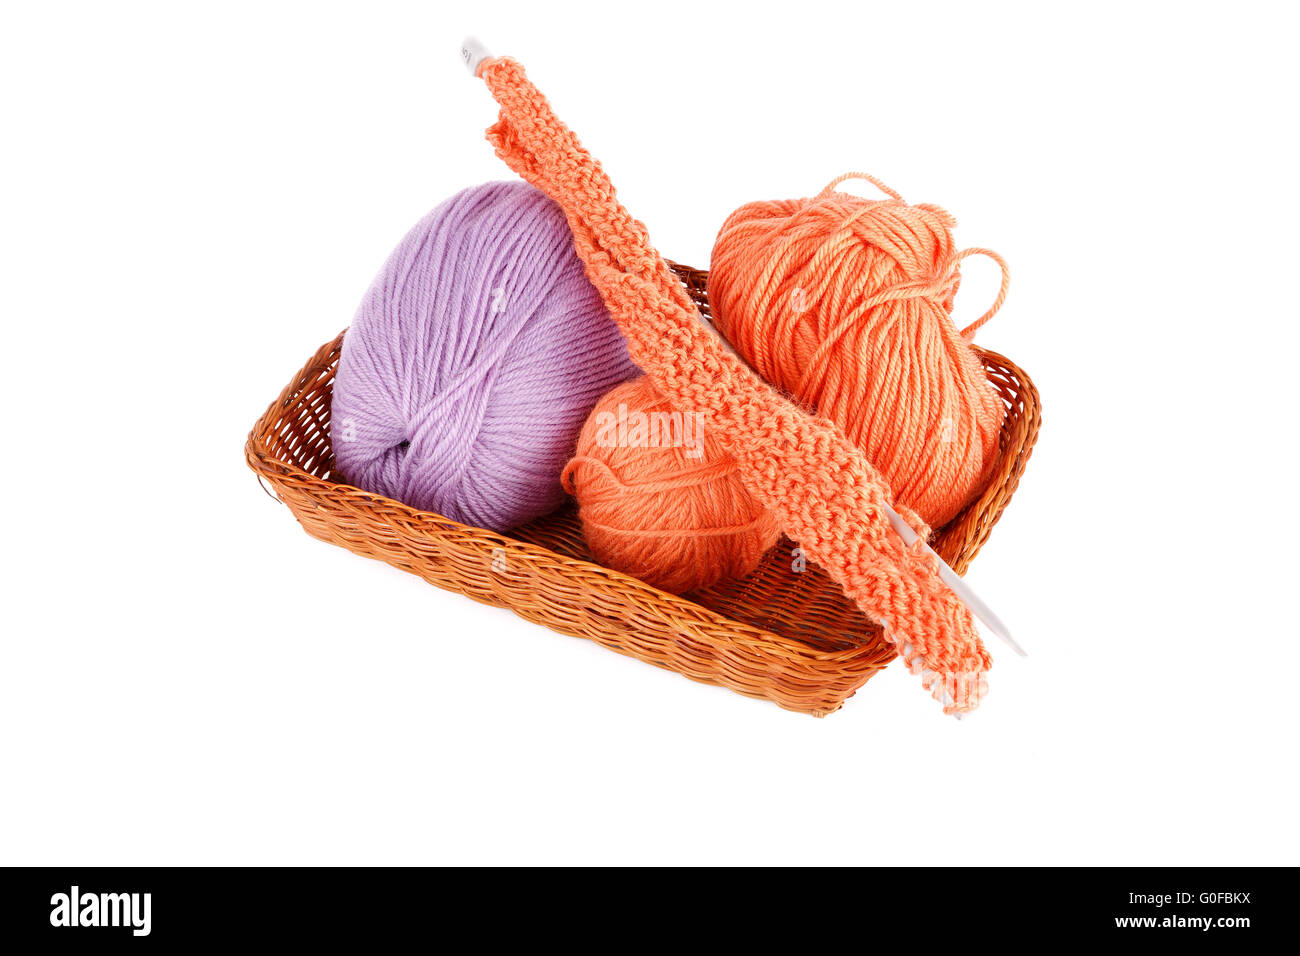 Balls of a yarn knitting in wooden box on white background Stock Photo